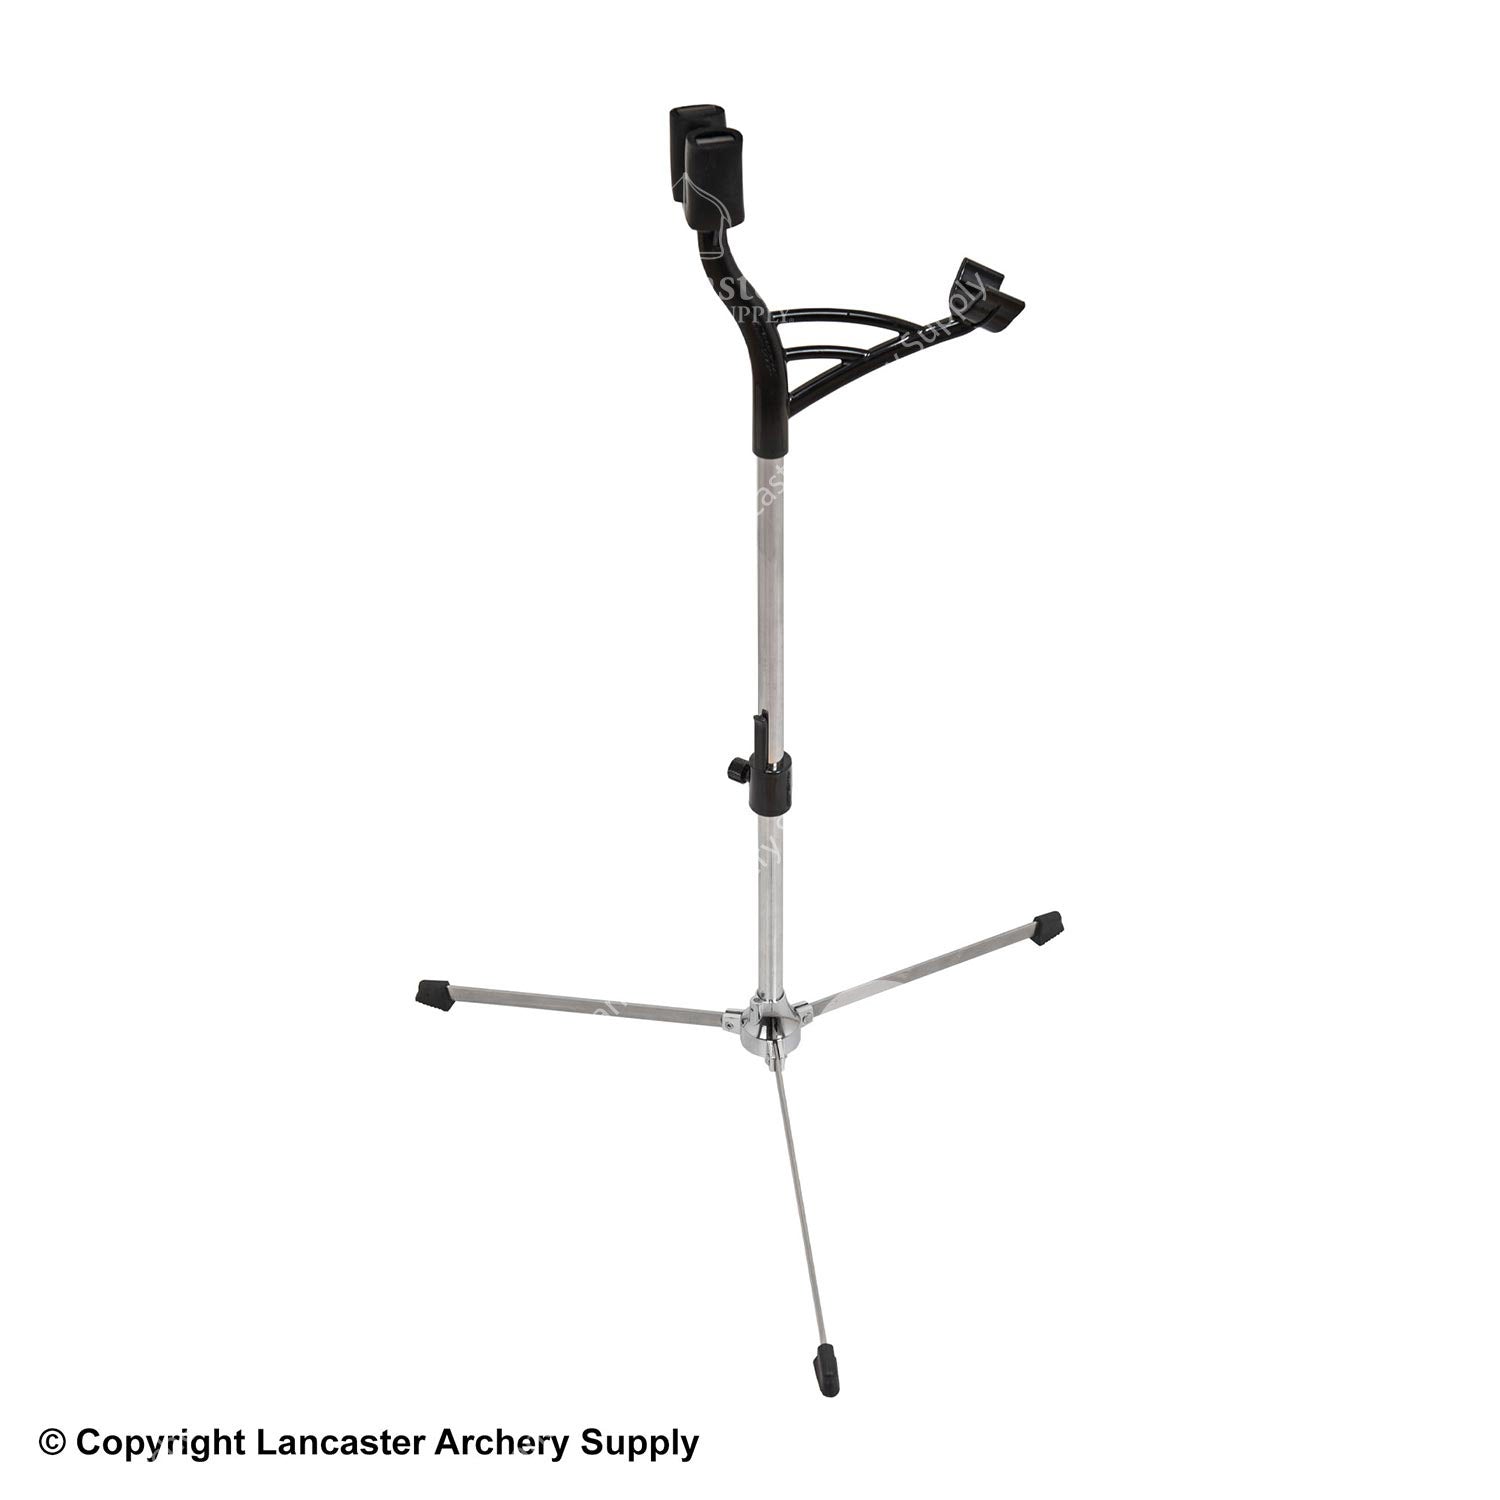 Avalon Classic One20 Recurve Bowstand